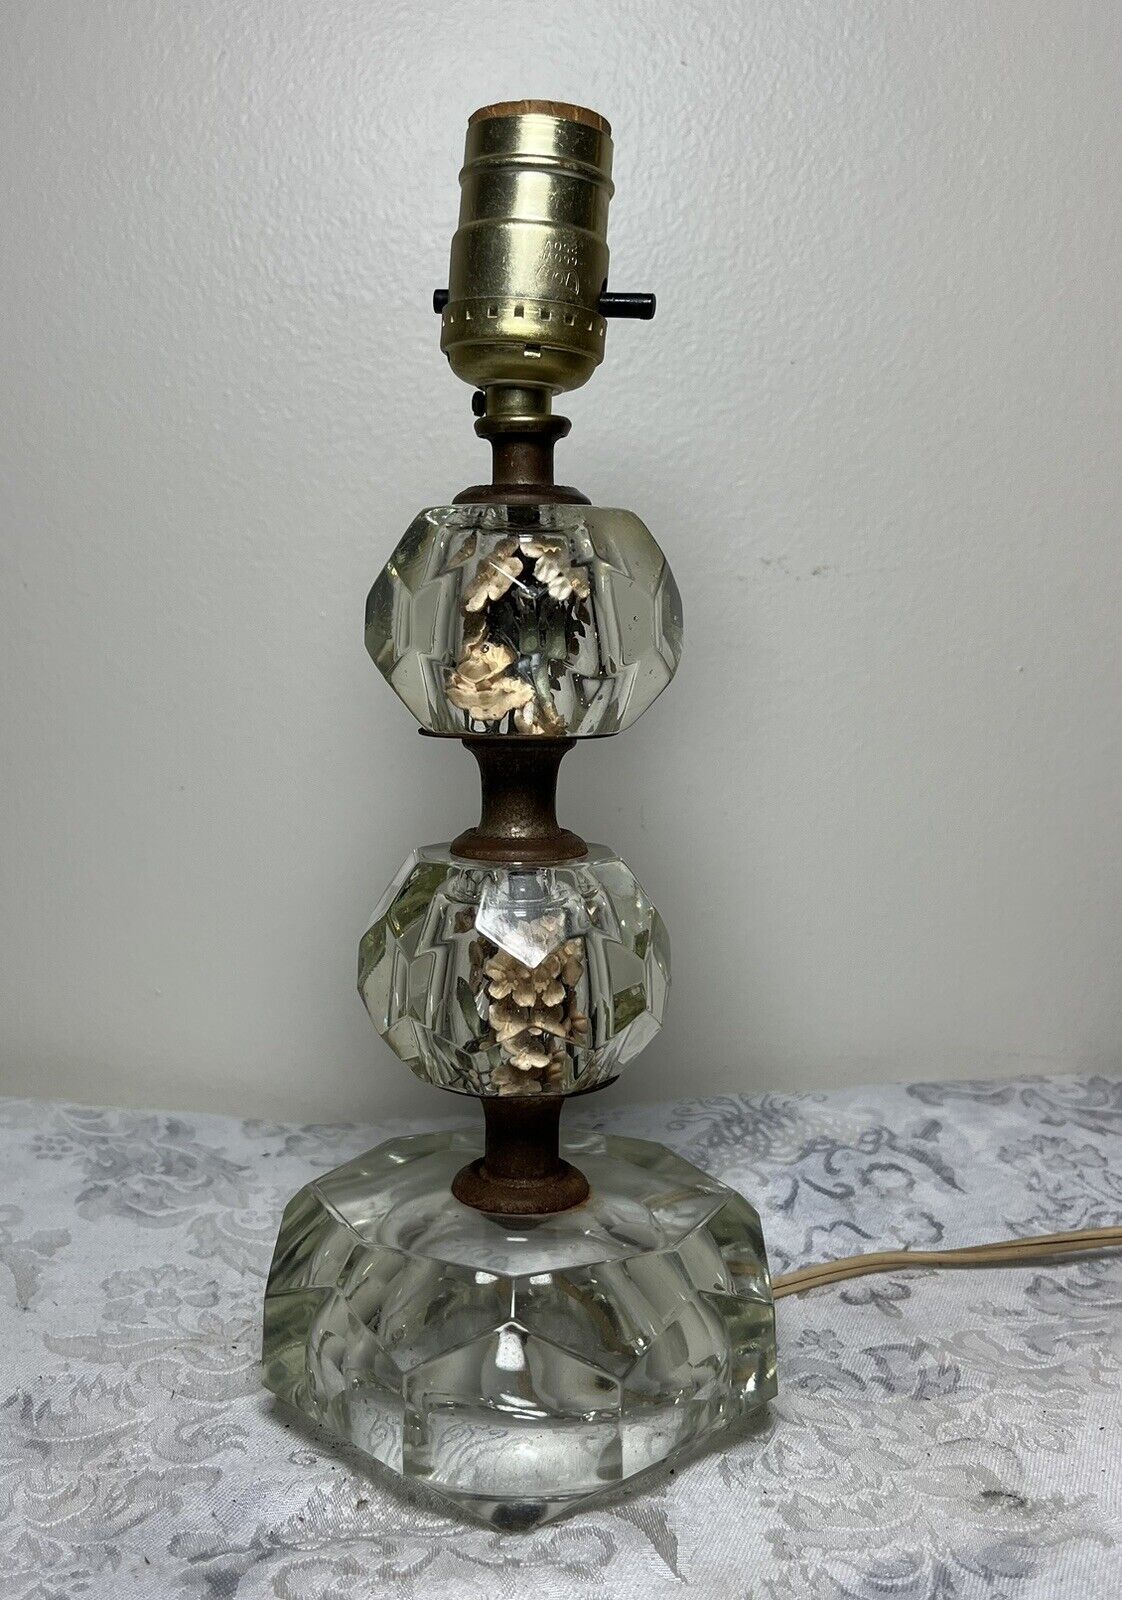 Vtg / Antique Table Lamp Crystal / Glass With Flowers Inside Nice Works